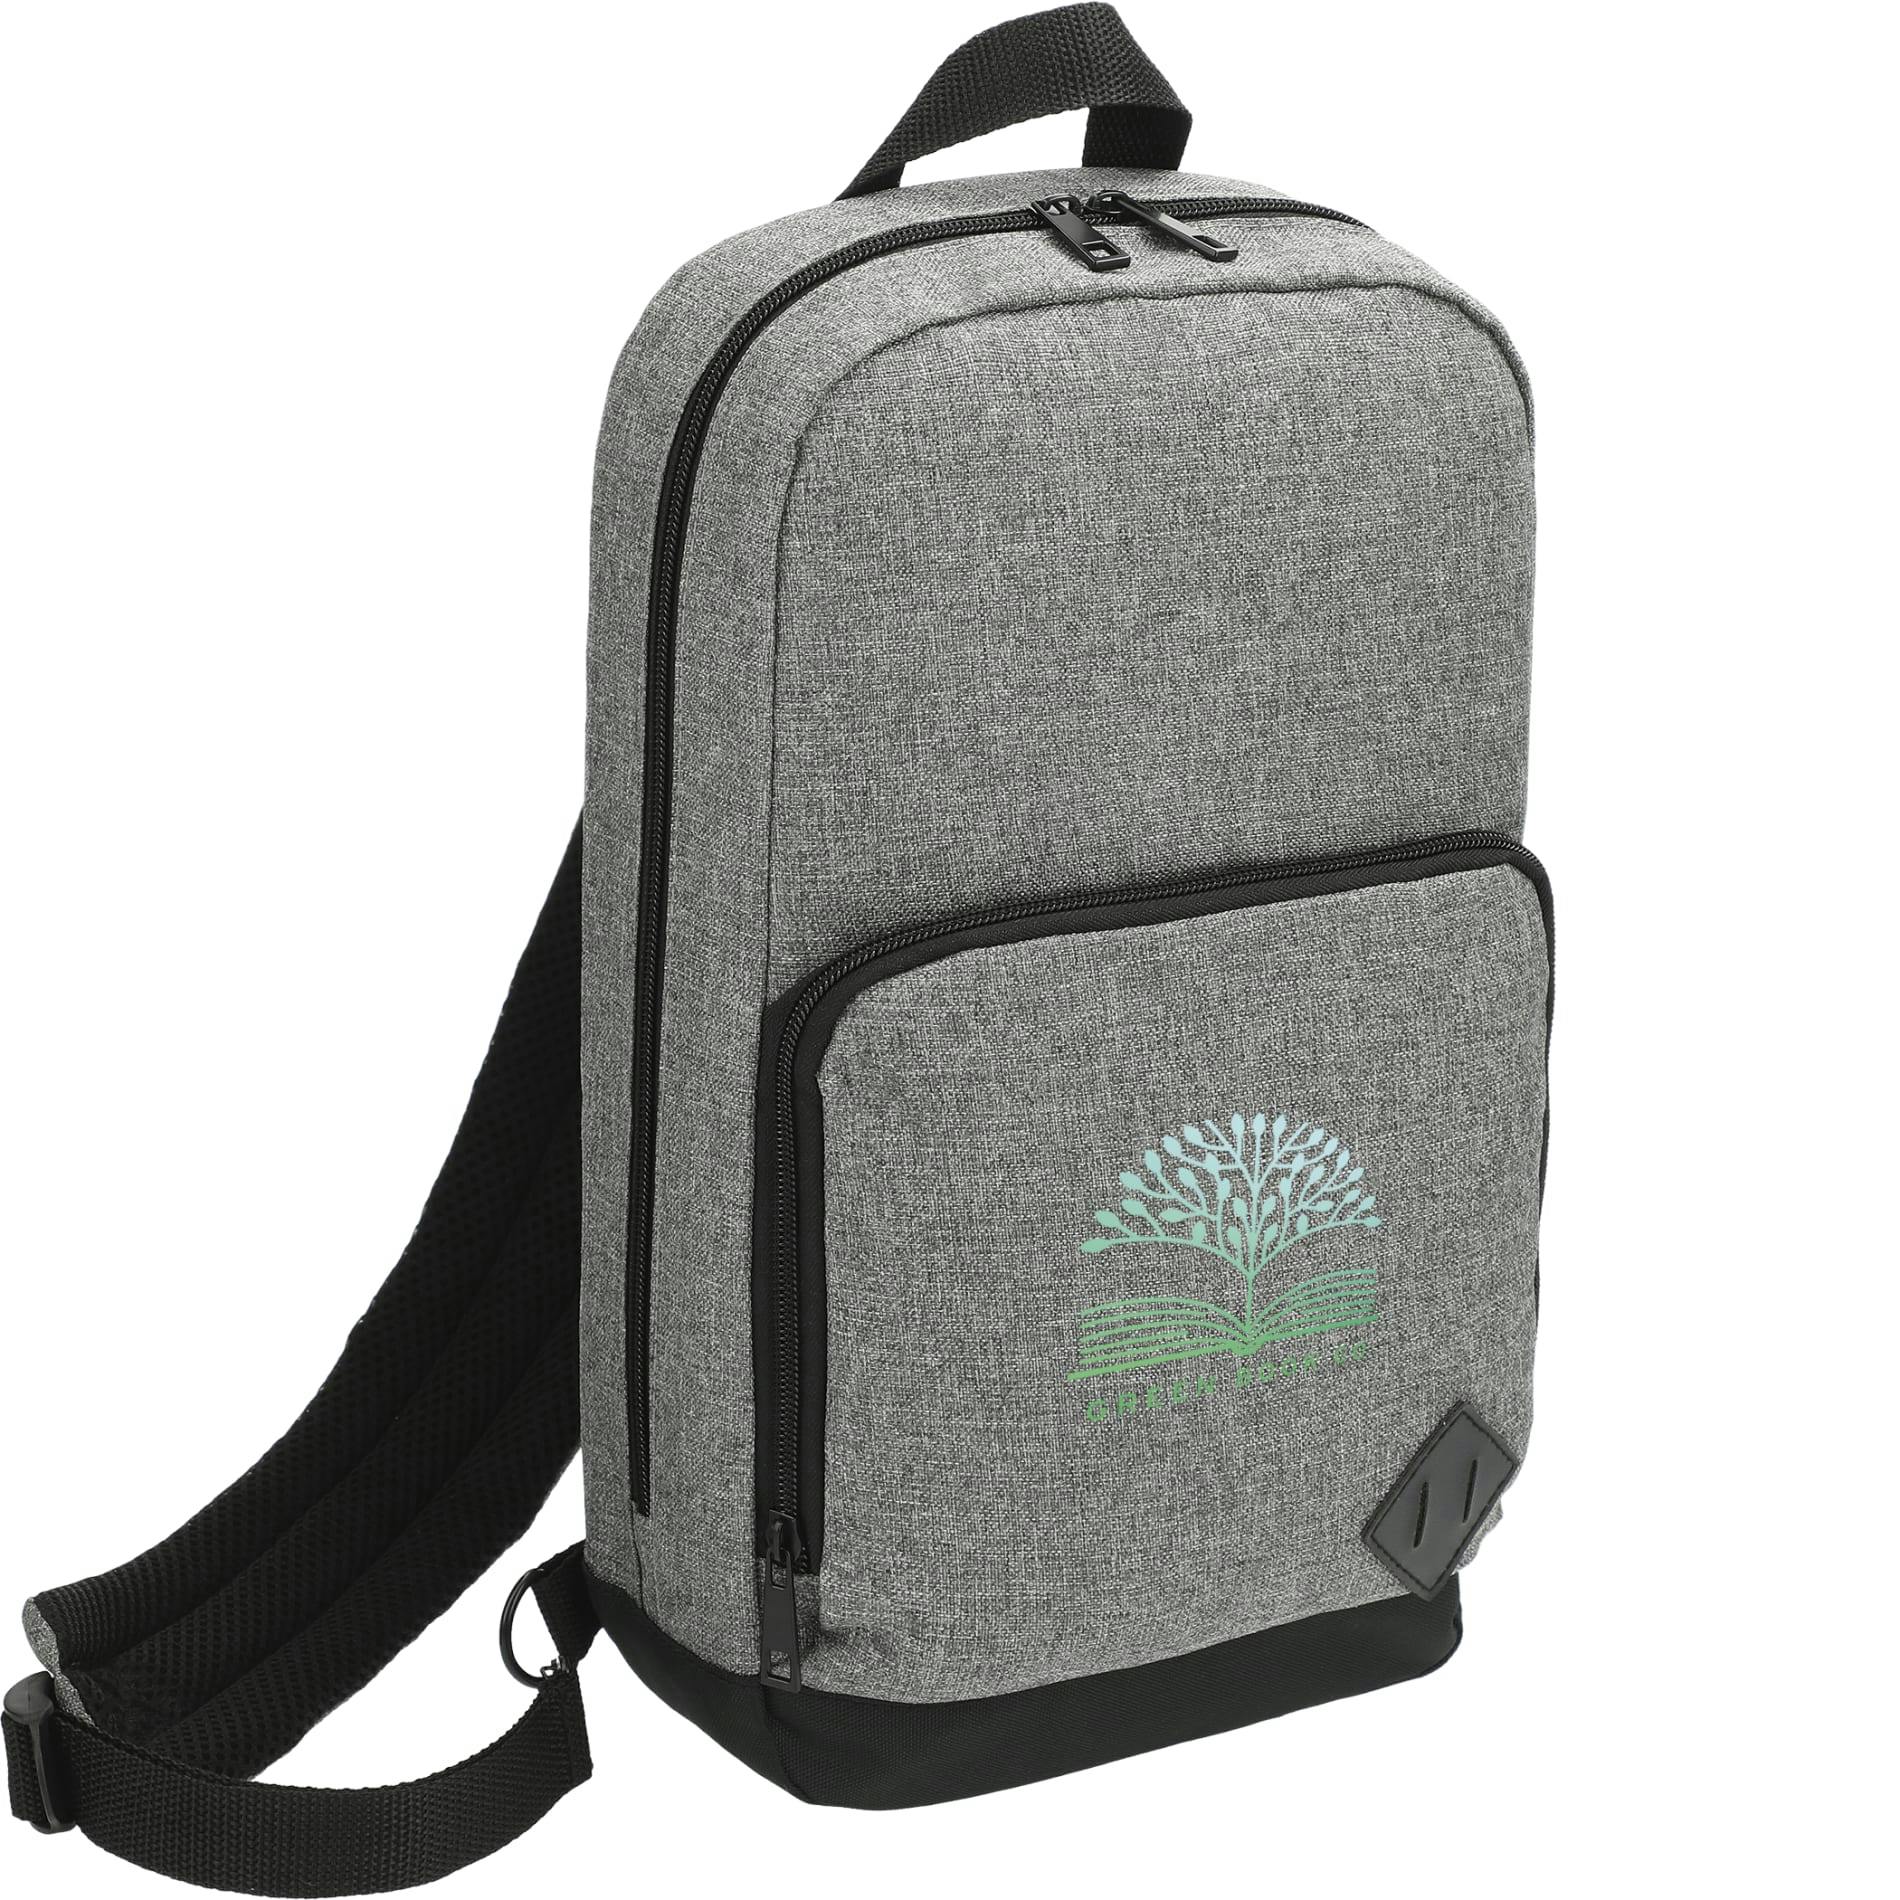 Graphite Deluxe Recycled Sling Backpack - additional Image 3